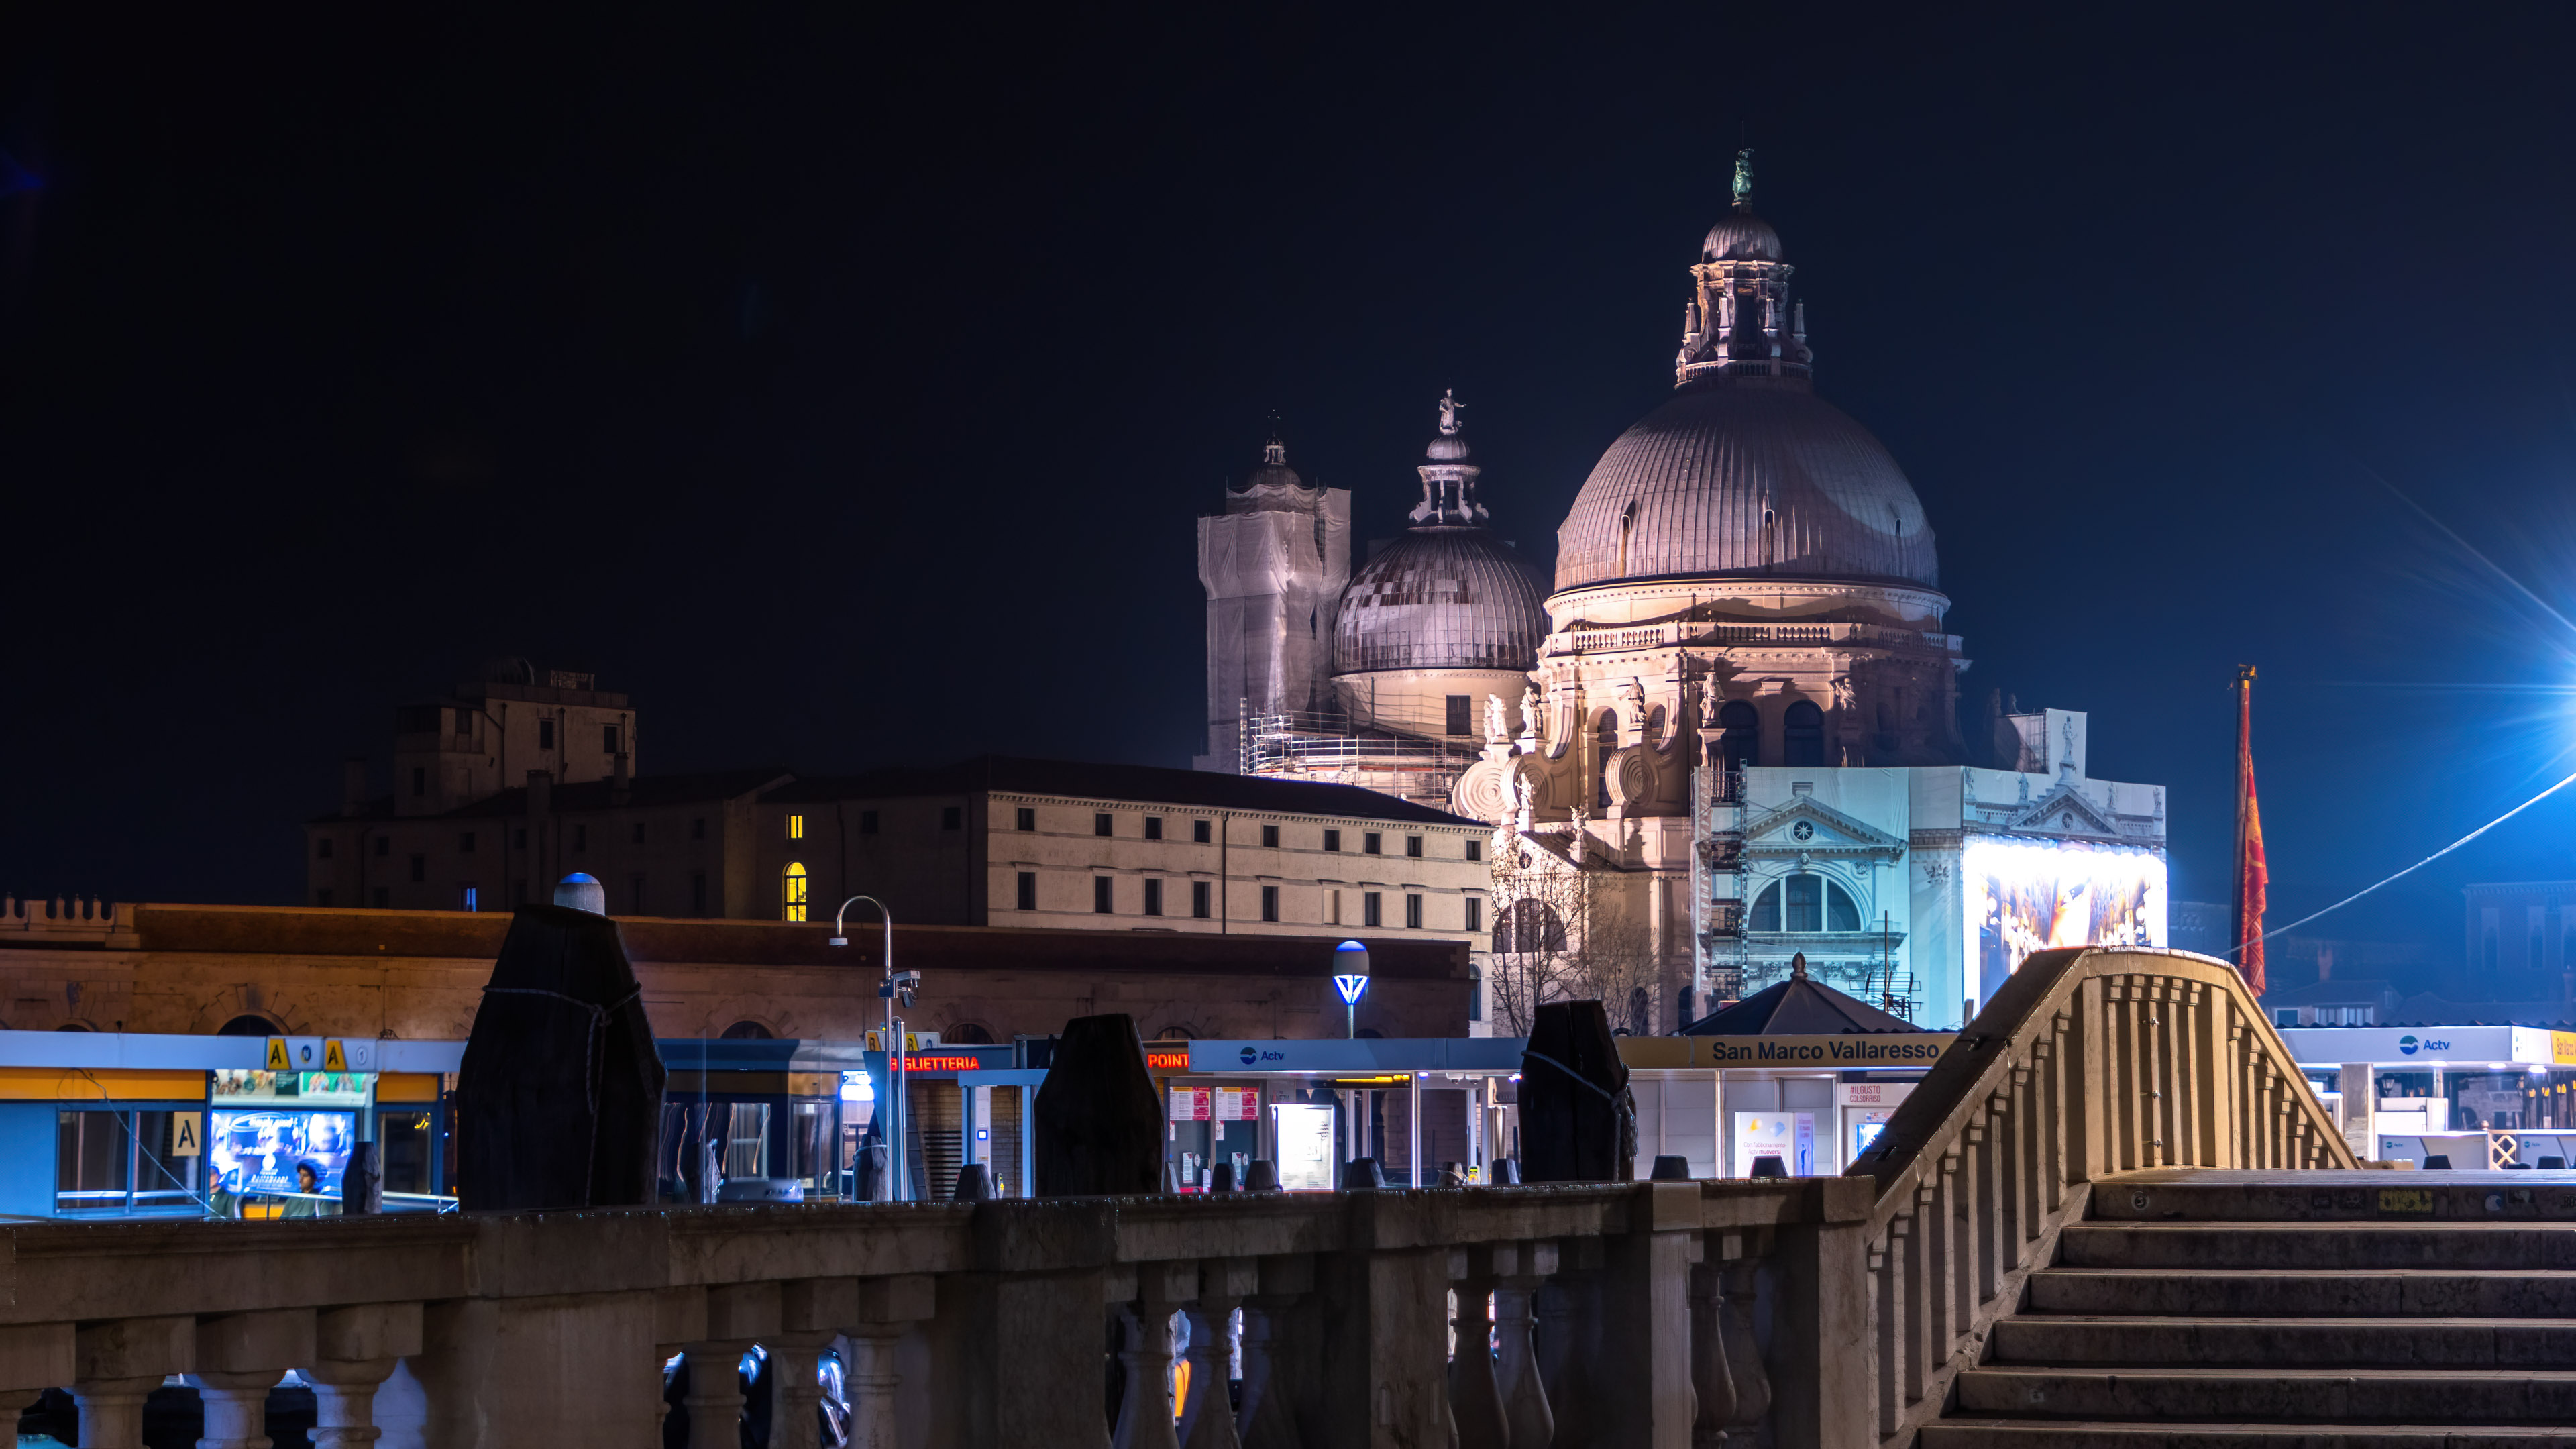 Experience the timeless beauty of Venice at night with our night city wallpaper, offering a breathtaking cityscape under the tranquil hues of the night sky.